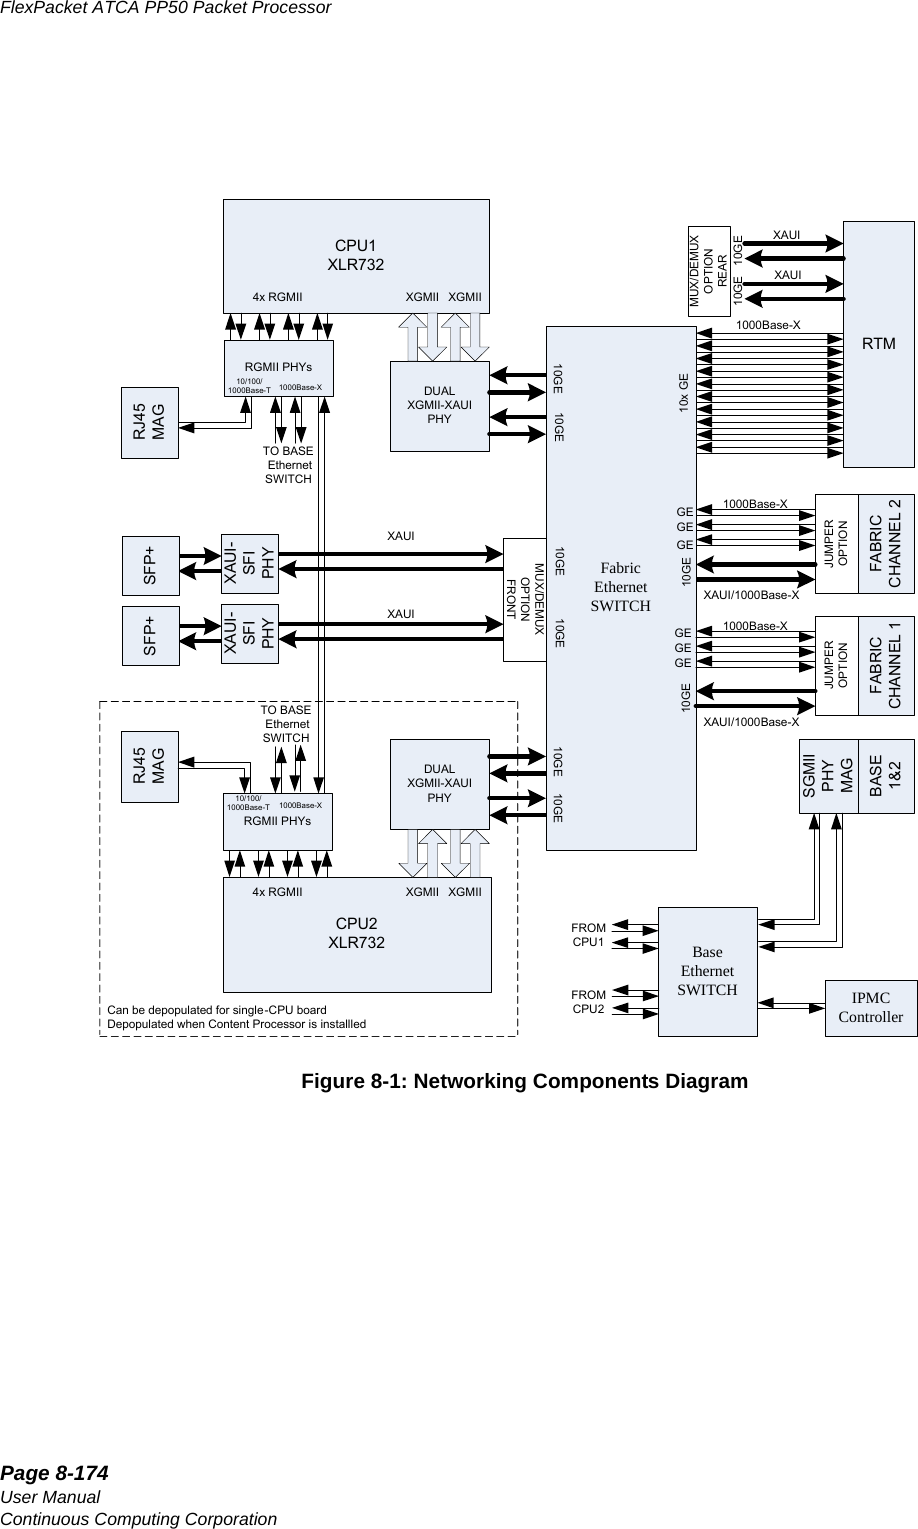 Page 8-174User ManualContinuous Computing CorporationFlexPacket ATCA PP50 Packet Processor     PreliminaryFigure 8-1: Networking Components DiagramJUMPEROPTIONJUMPEROPTIONRTMDUALXGMII-XAUIPHYCPU1 XLR732CPU2XLR732XGMII XGMIISGMIIPHY MAGBASE 1&amp;2IPMCControllerDUALXGMII-XAUIPHYXGMII XGMIIRGMII PHYs4x RGMII10GE 10GESFP+MUX/DEMUXOPTIONFRONTBaseEthernetSWITCHTO BASE EthernetSWITCHMUX/DEMUXOPTIONREARFROM CPU1FROM CPU2SFP+XAUI-SFI PHYXAUI-SFI PHYRJ45MAGRGMII PHYsTO BASE EthernetSWITCHRJ45MAGCan be depopulated for single -CPU boardDepopulated when Content Processor is installledFABRICCHANNEL 1FABRICCHANNEL 21000Base-X1000Base-XXAUIXAUI/1000Base-XFabricEthernetSWITCH10x GE10GE10GEGEGEGEGEGEGE10GE 10GE10GE10GE 10GE 10GE1000Base-XXAUI/1000Base-X1000Base-X10/100/1000Base-T4x RGMII1000Base-X10/100/1000Base-TXAUIXAUIXAUI